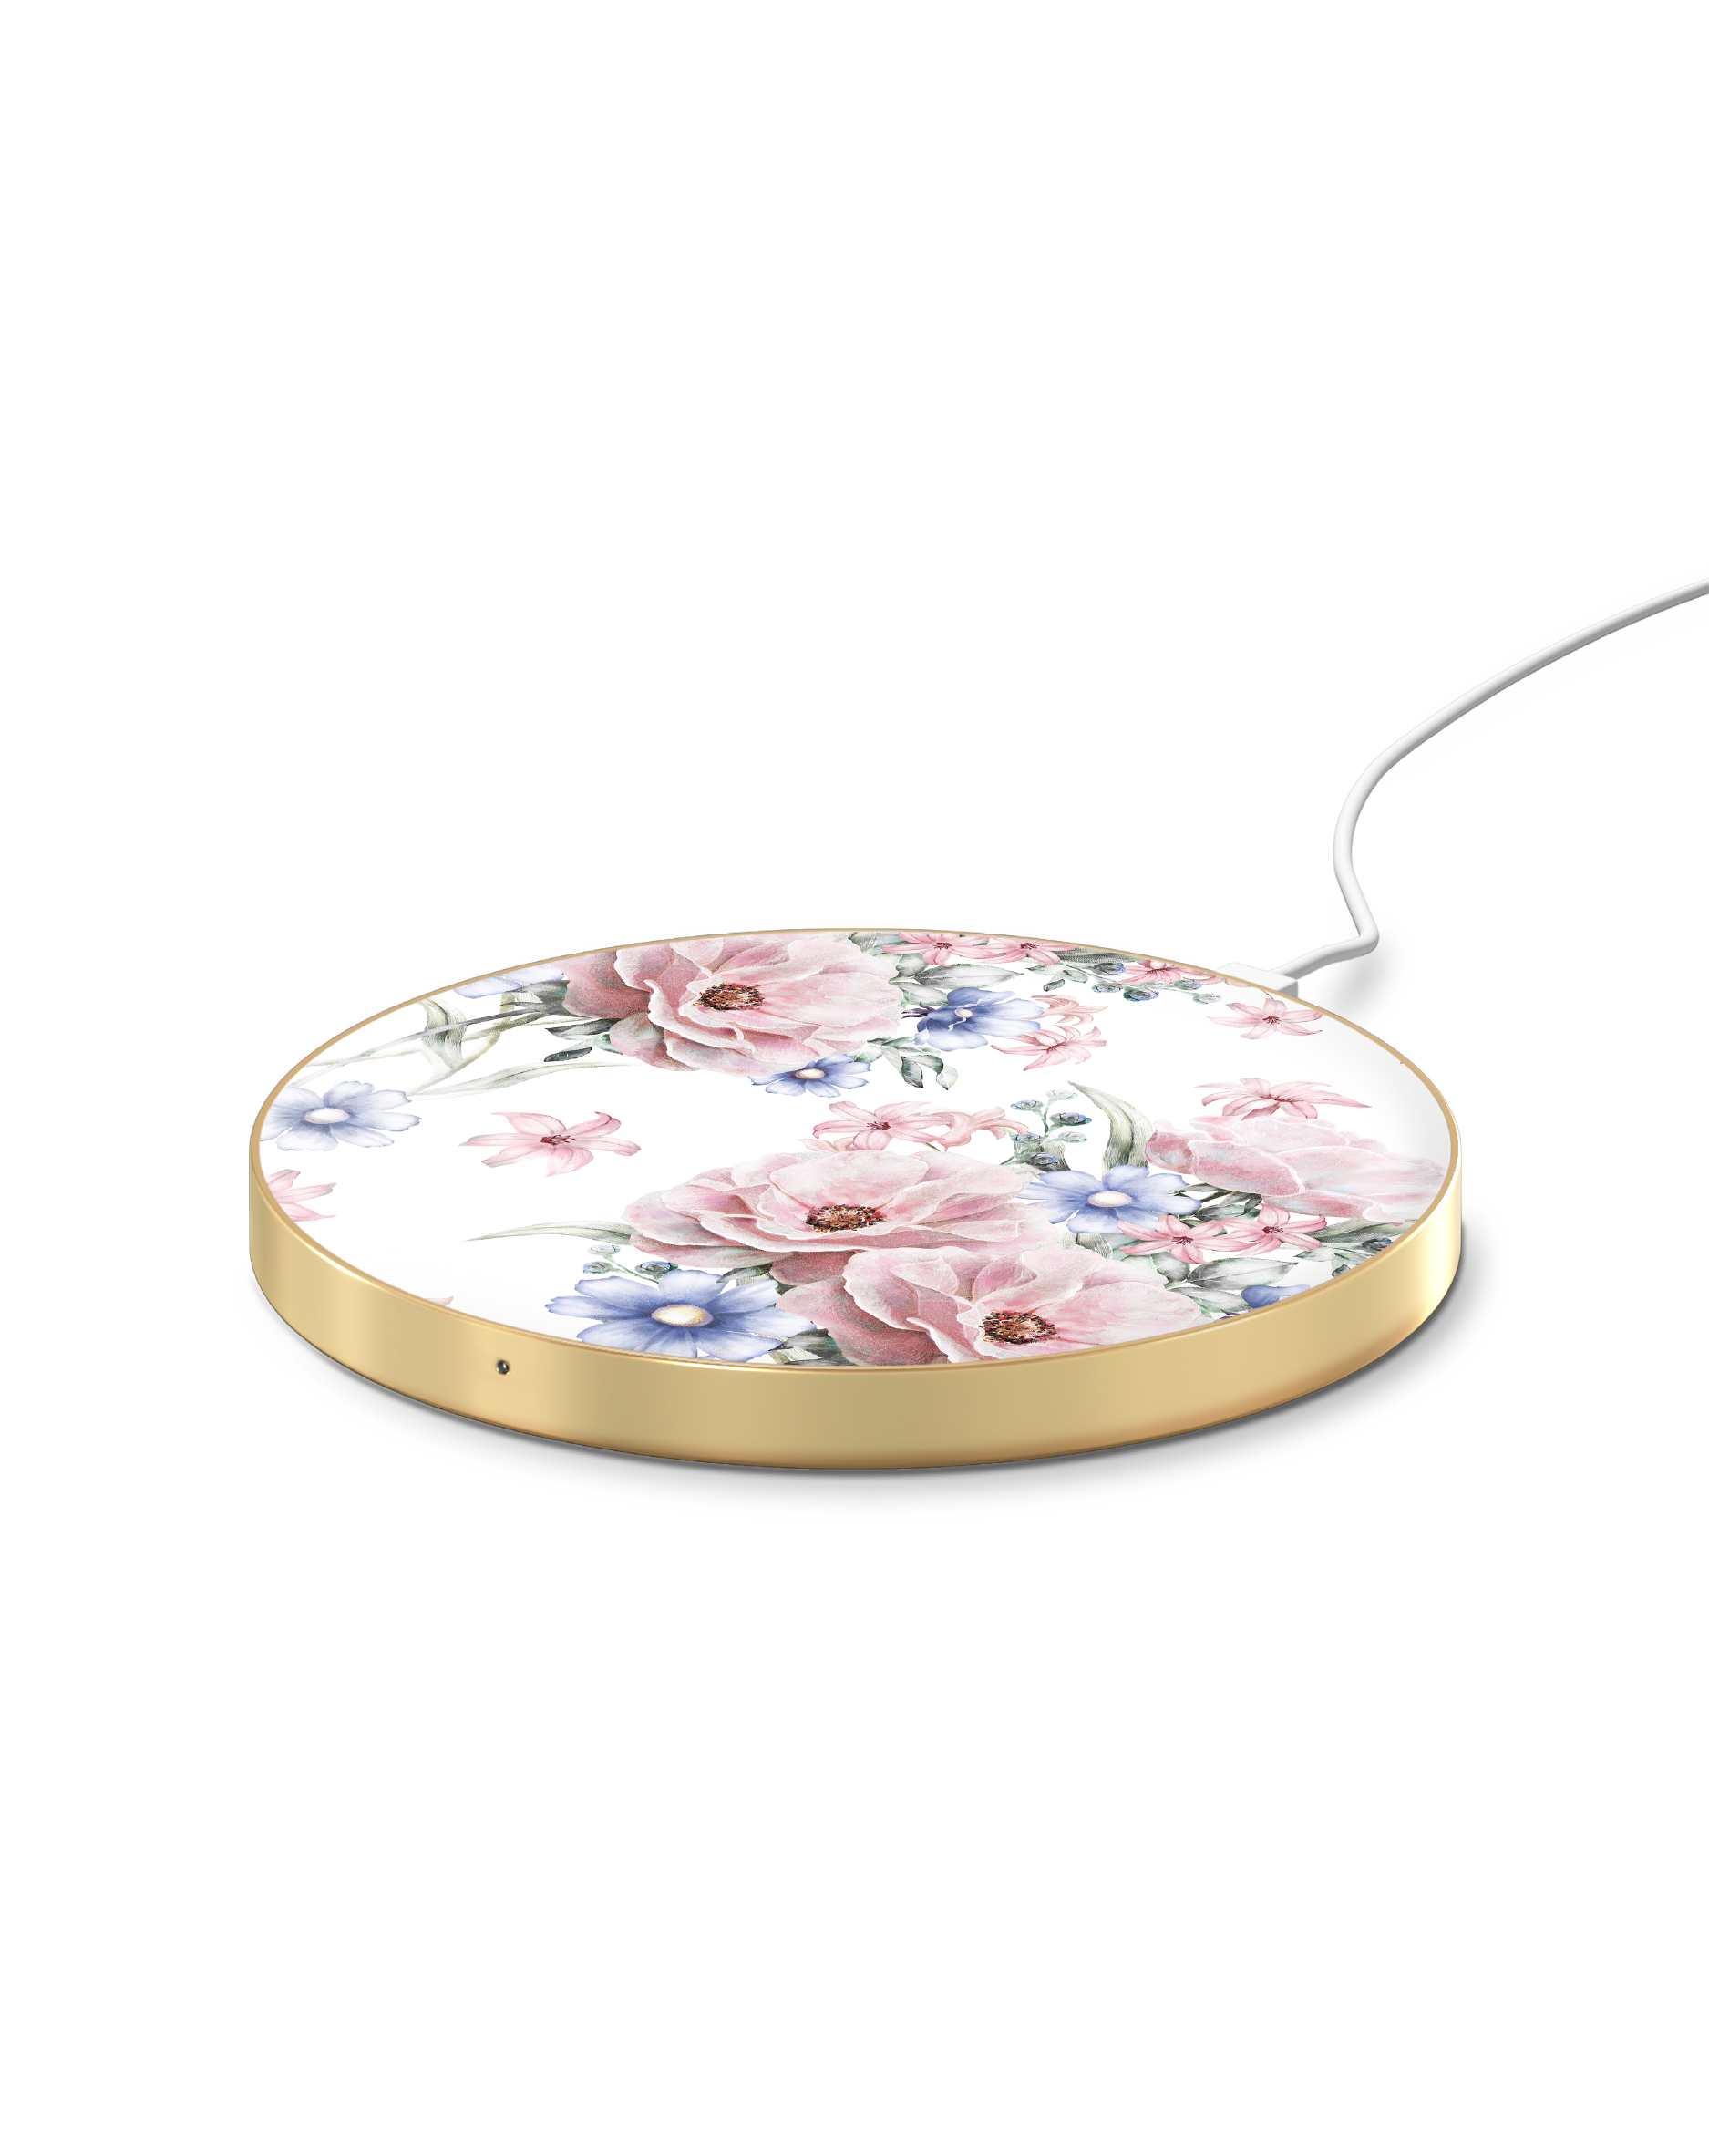 IDEAL OF Floral station inductive Charger IDFQI-58 Romance SWEDEN Universal, Qi charging